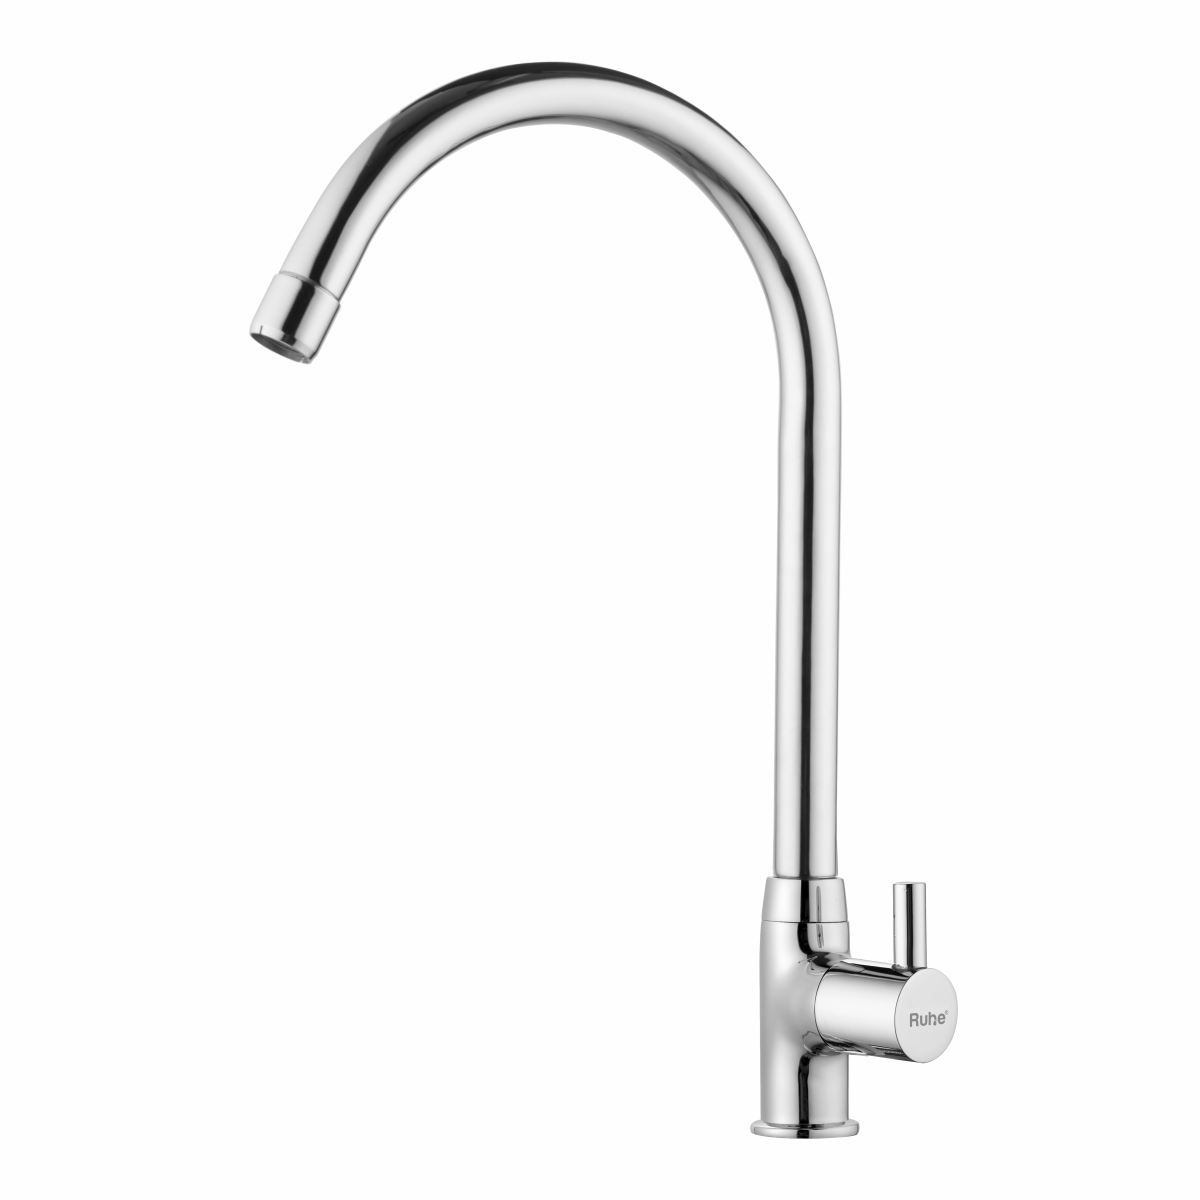 Kara Swan Neck with Large (20 inches) Round Swivel Spout Faucet